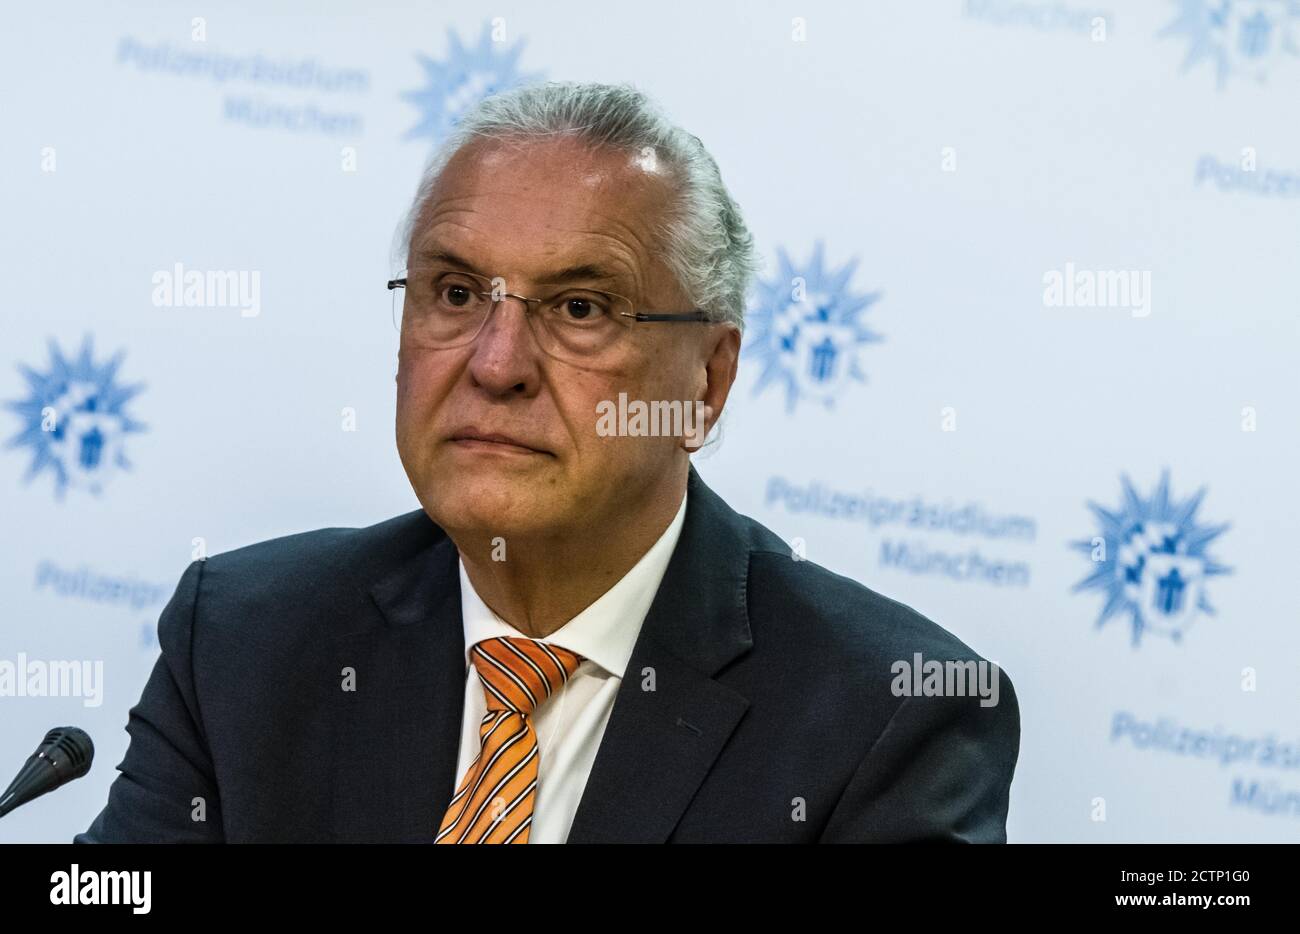 Munich, Bavaria, Germany. 24th Sep, 2020. JOACHIM HERRMANN, Bavarian Interior Minister.Â Bavarian Interior Minister Joachim Herrmann introduced the new bookÂ ''Islamischer Staat: Geschlagen, nicht besiegt'' (''Islamic State: Beaten, but Not Defeated'') by Dr. Daniel Holz andÂ terrorism expert Rolf Tophoven at the PolizeipraesidiumÂ Munich.Â The trio engaged in aÂ discussion of the Islamic State (IS, ISIS) in an overview, how IS' methodology has changed over the years, and how its terrorist network attempts to spread its influence in the modern era. (Credit Image: © Sachelle Babbar/ZUMA W Stock Photo